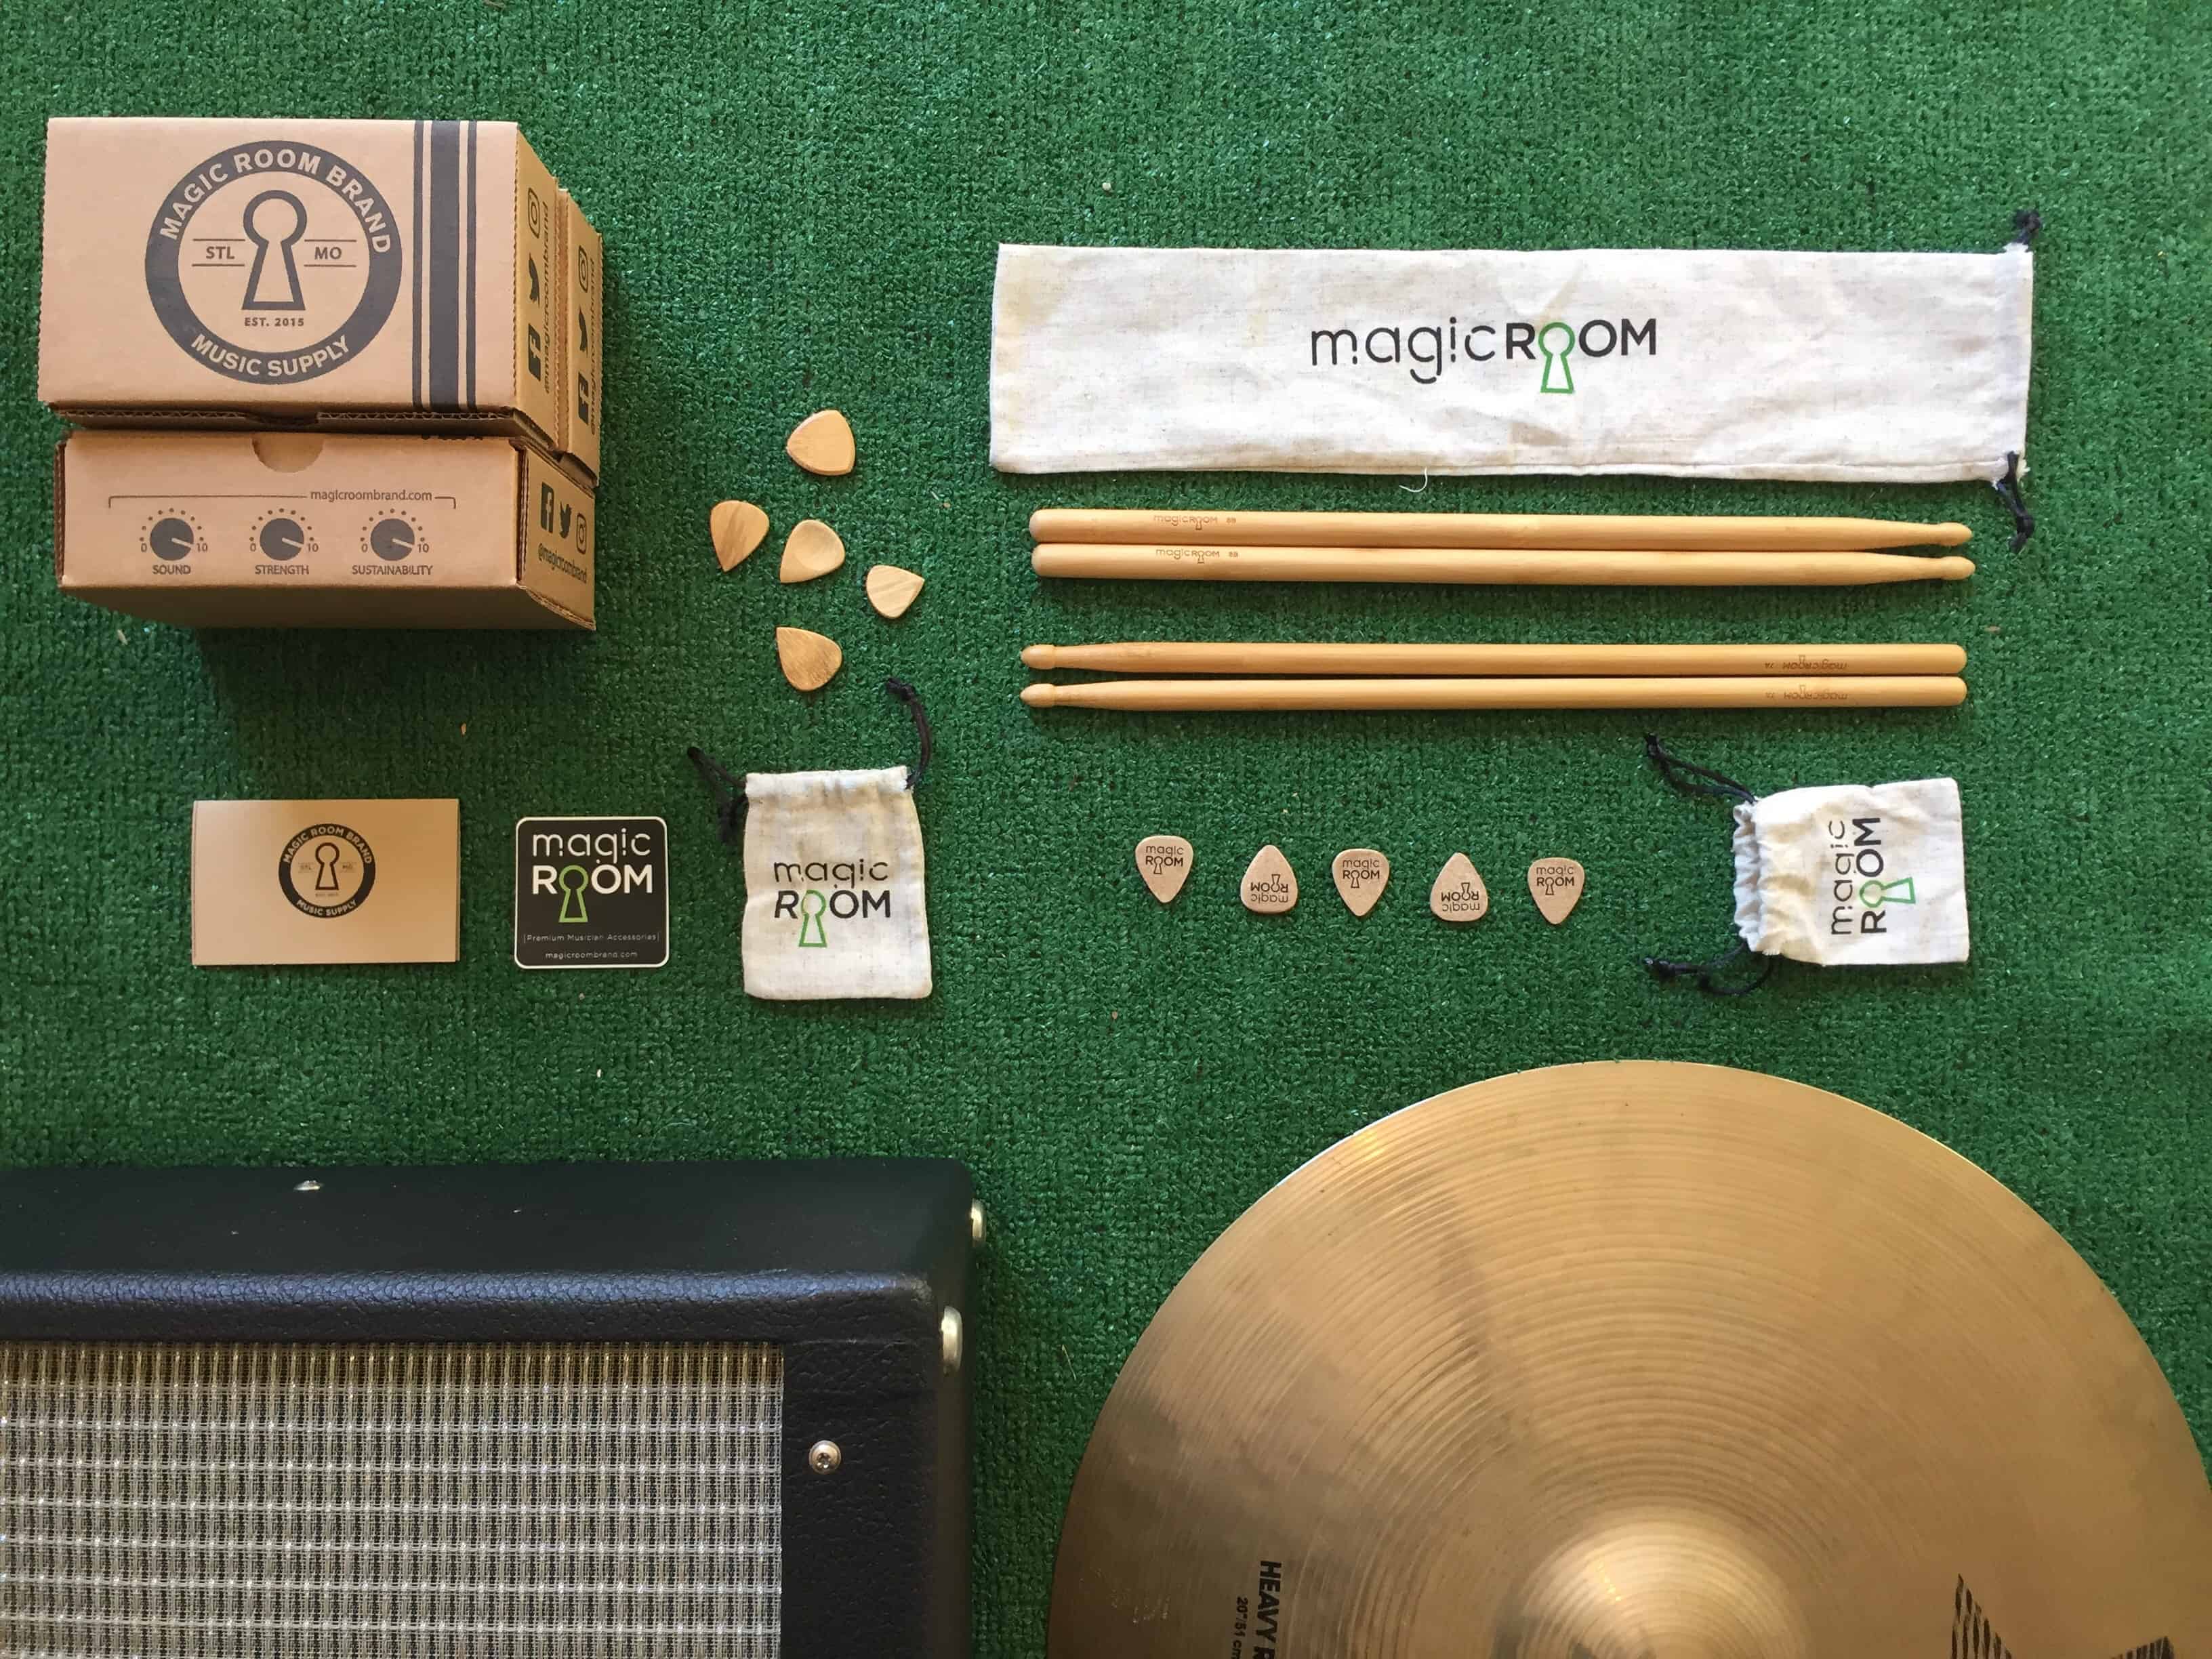 Meet Magic Room Band, The Only Eco-Friendly, 100% Biodegradable Music Accessories On The Market